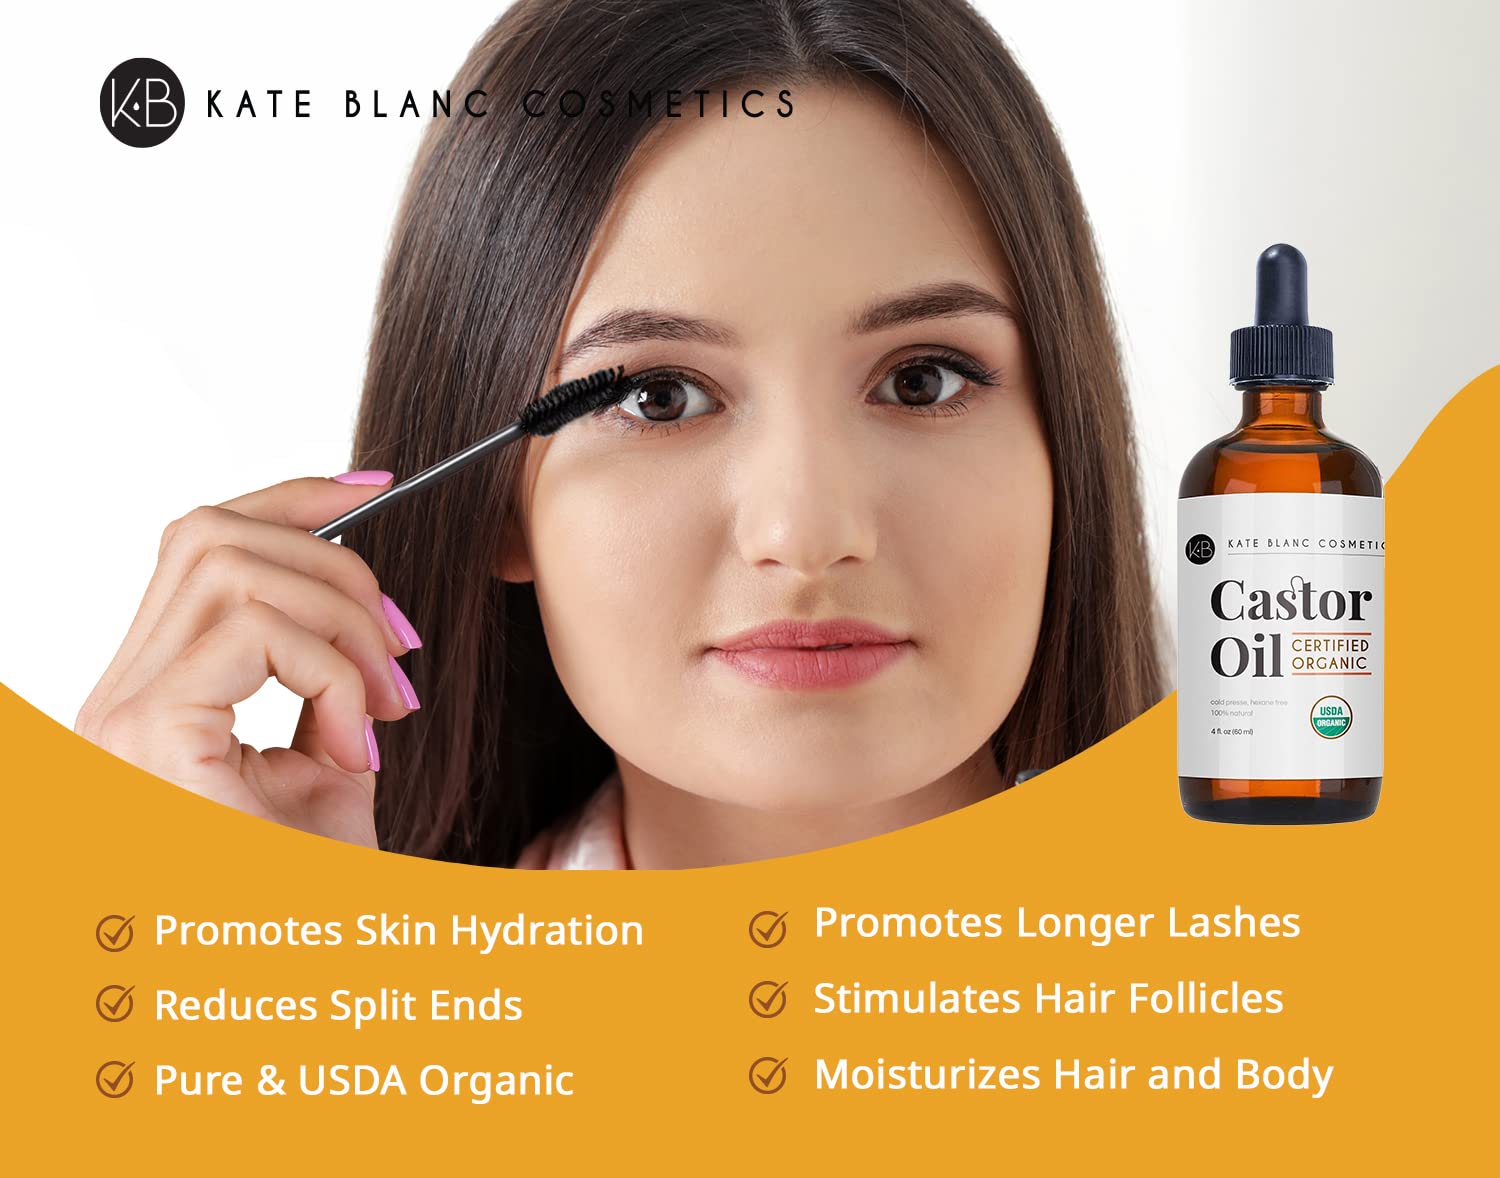 Kate Blanc Cosmetics Organic Castor Oil (4oz). 100% Pure, Cold Pressed, Hexane Free in a Glass Bottle. Stimulate Growth for Eyelashes, Eyebrows, Hair. Skin Moisturizer & Oil Cleanse with Starter Kit